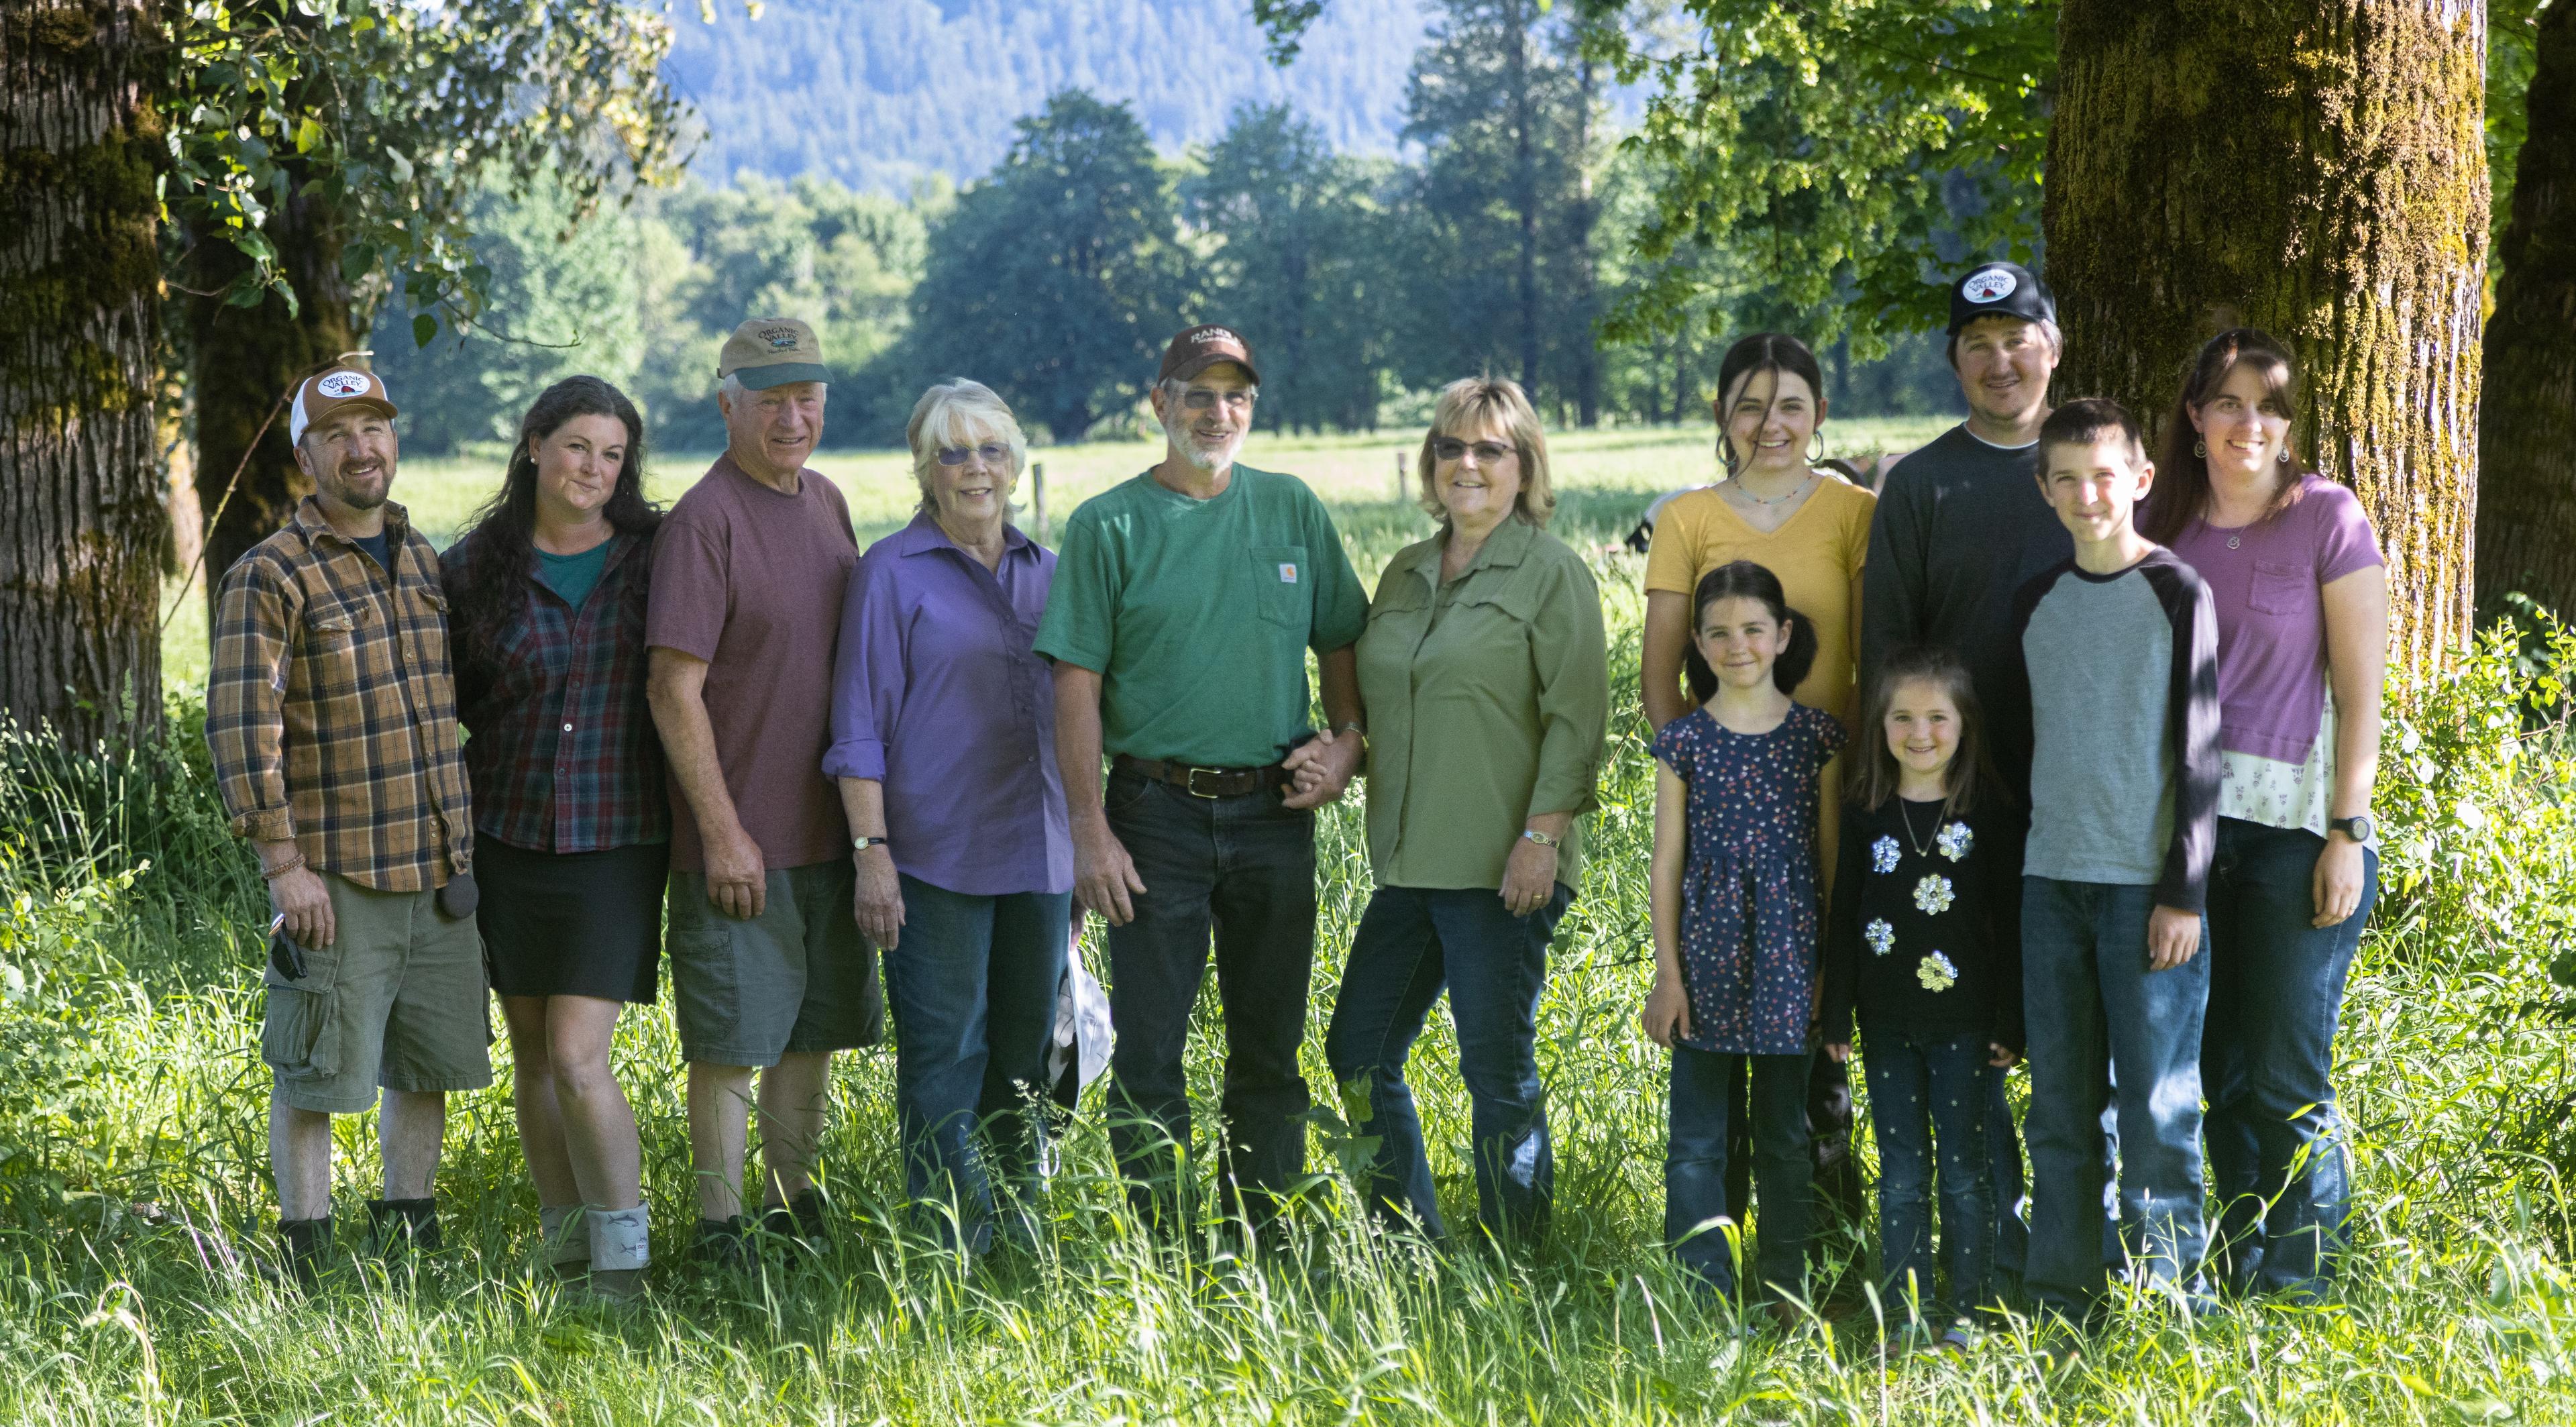 Twelve members of the McMahan family pose by trees.